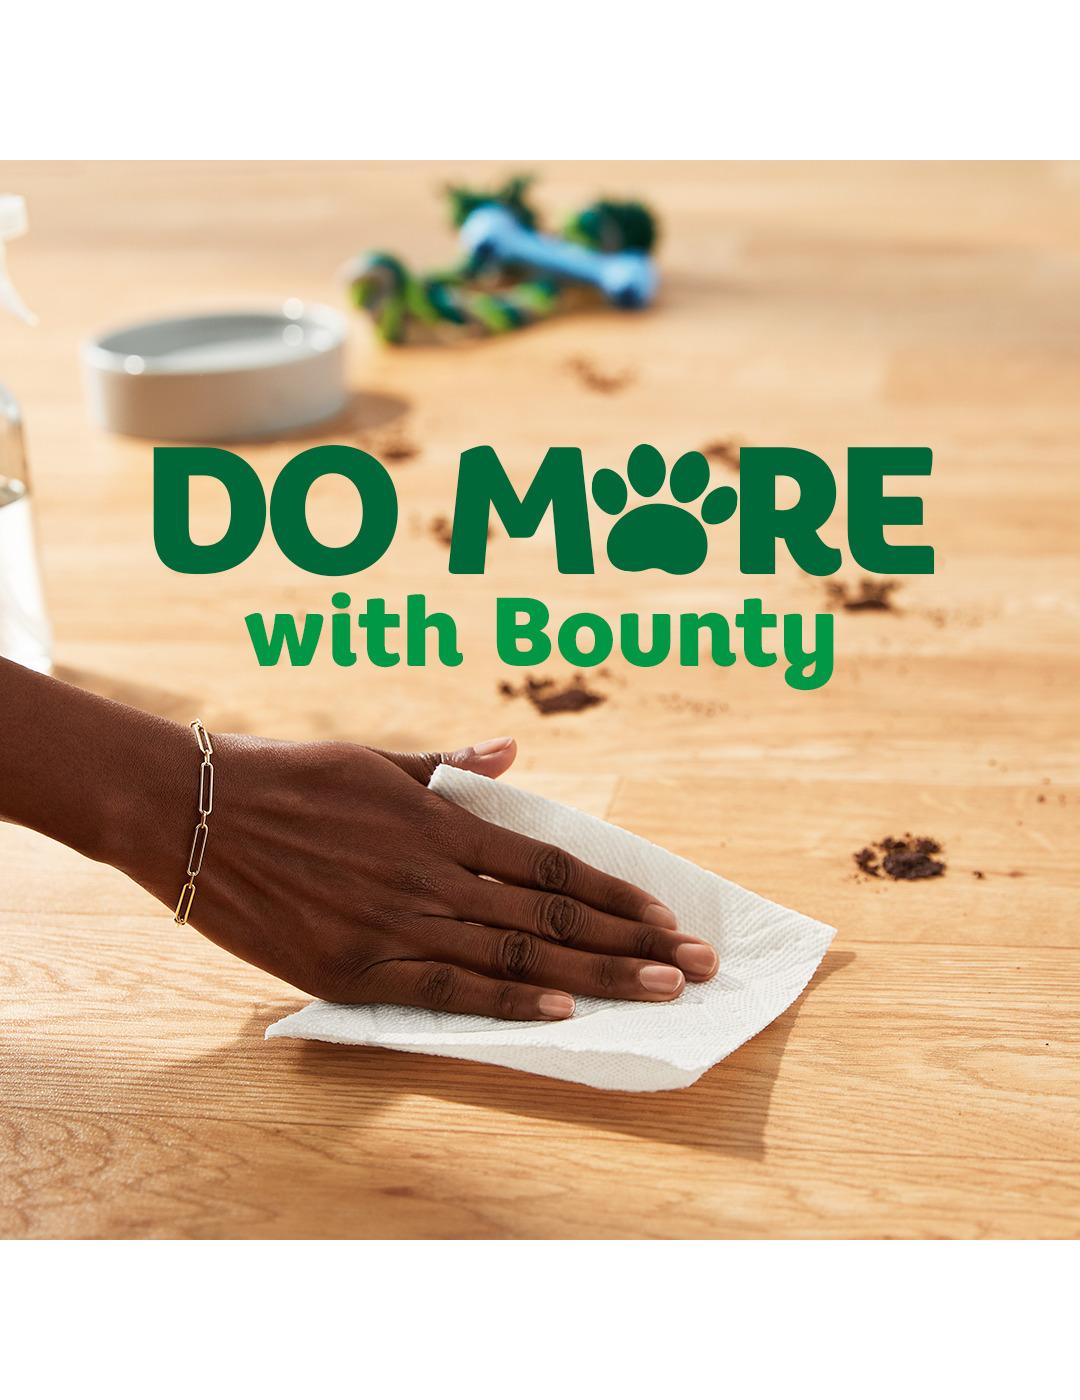 Bounty Select-A-Size Triple Roll Paper Towels; image 15 of 16